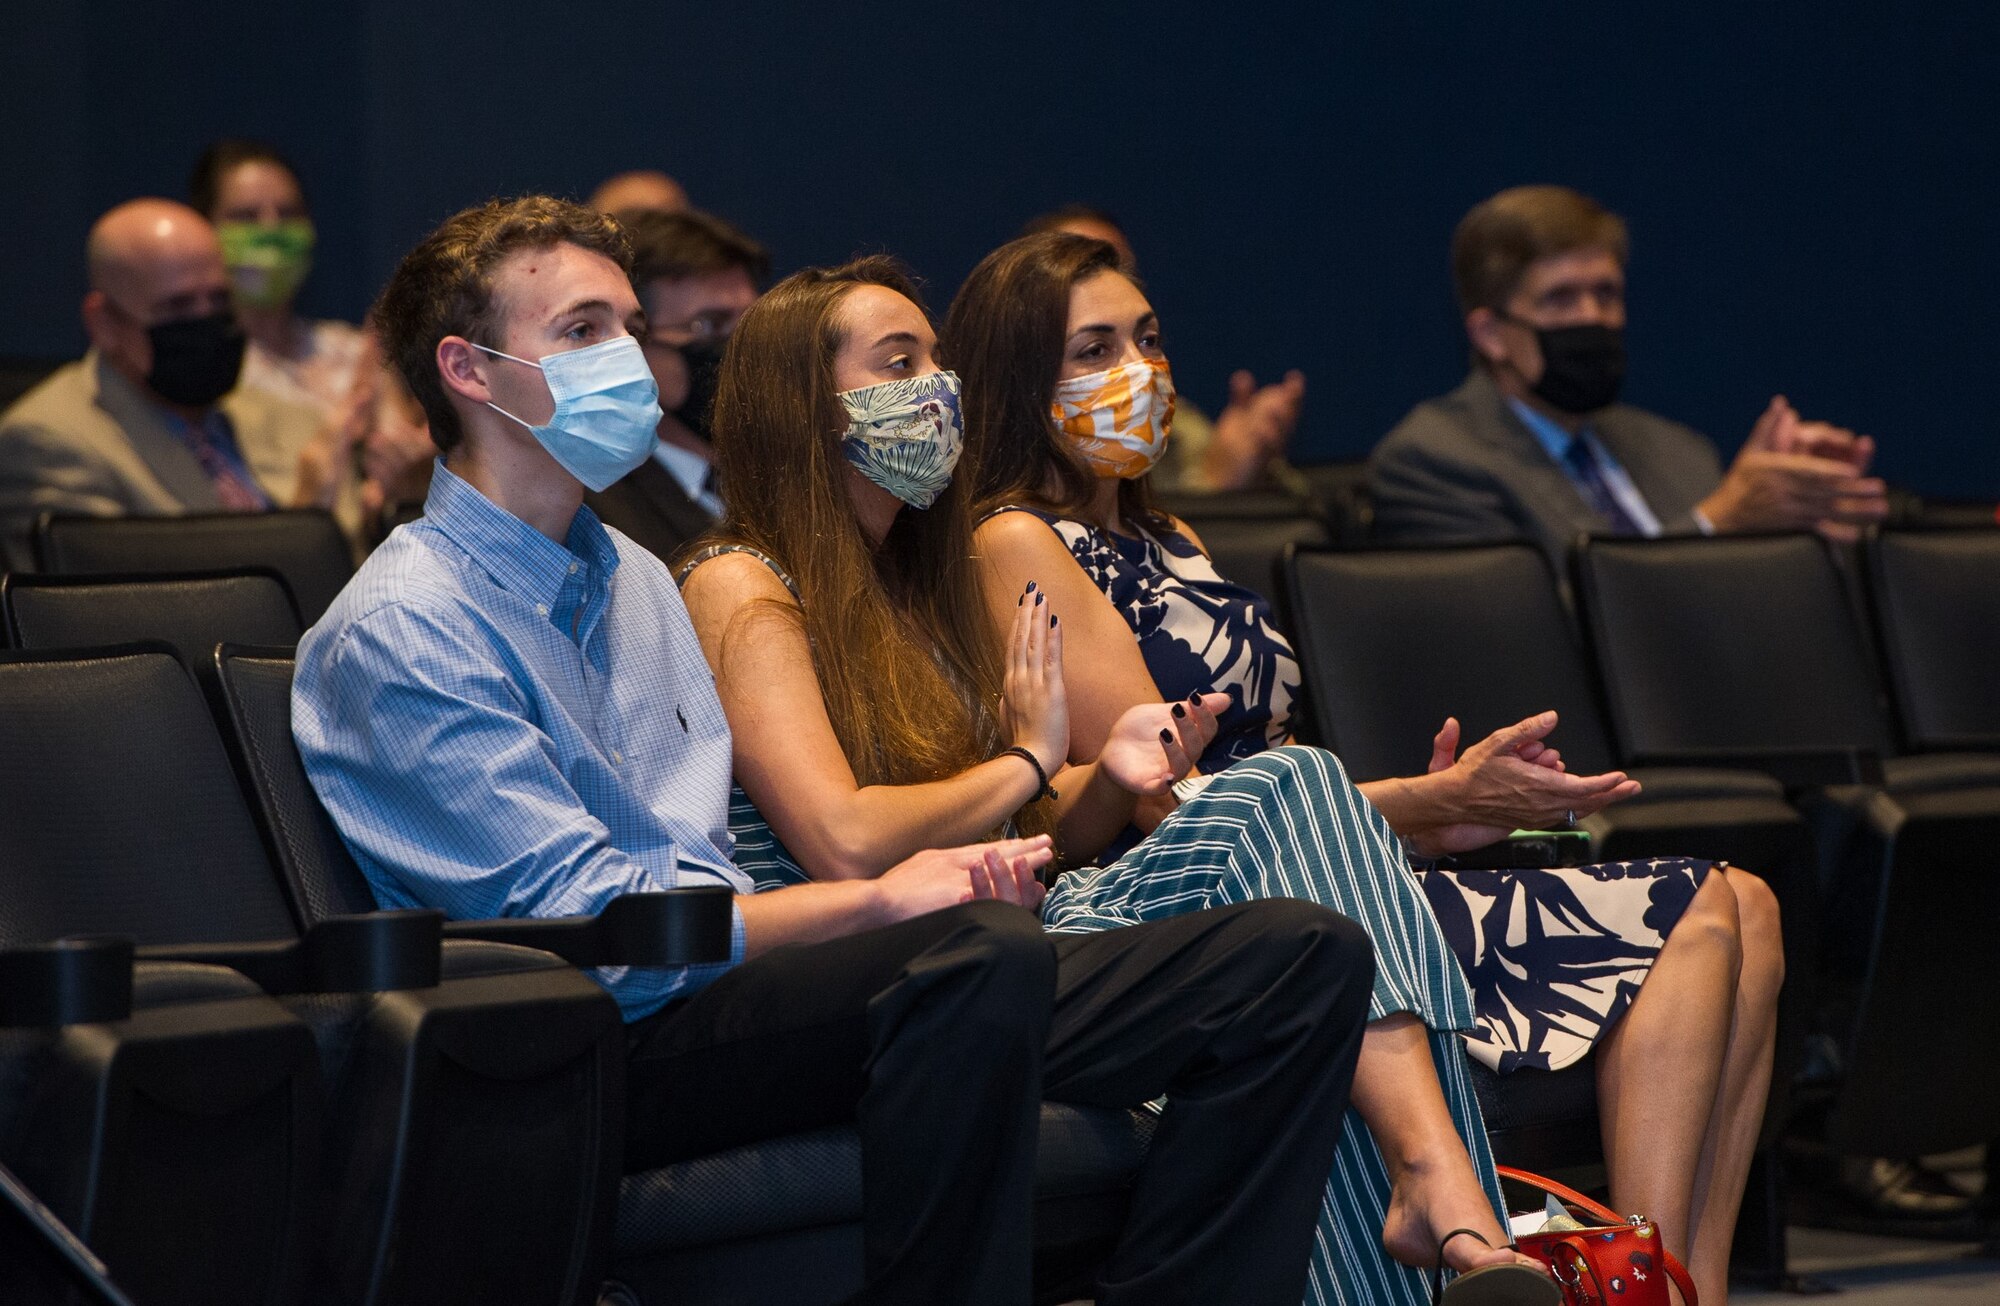 Donned in protective facial masks in the wake of the coronavirus pandemic, Gina Hartman (right) and her children Logan (left) and Sofia (center), applaud during the Air Force Technical Applications Center’s Change of Command ceremony June 30, 2020.  Gina’s husband, Col. Chad Hartman, relinquished command of the nuclear treaty monitoring center to Col. Katharine Barber at Patrick AFB, Fla., as others from the center are seen in background adhering to social distancing requirements.  (U.S. Air Force photo by Amanda Ryrholm)